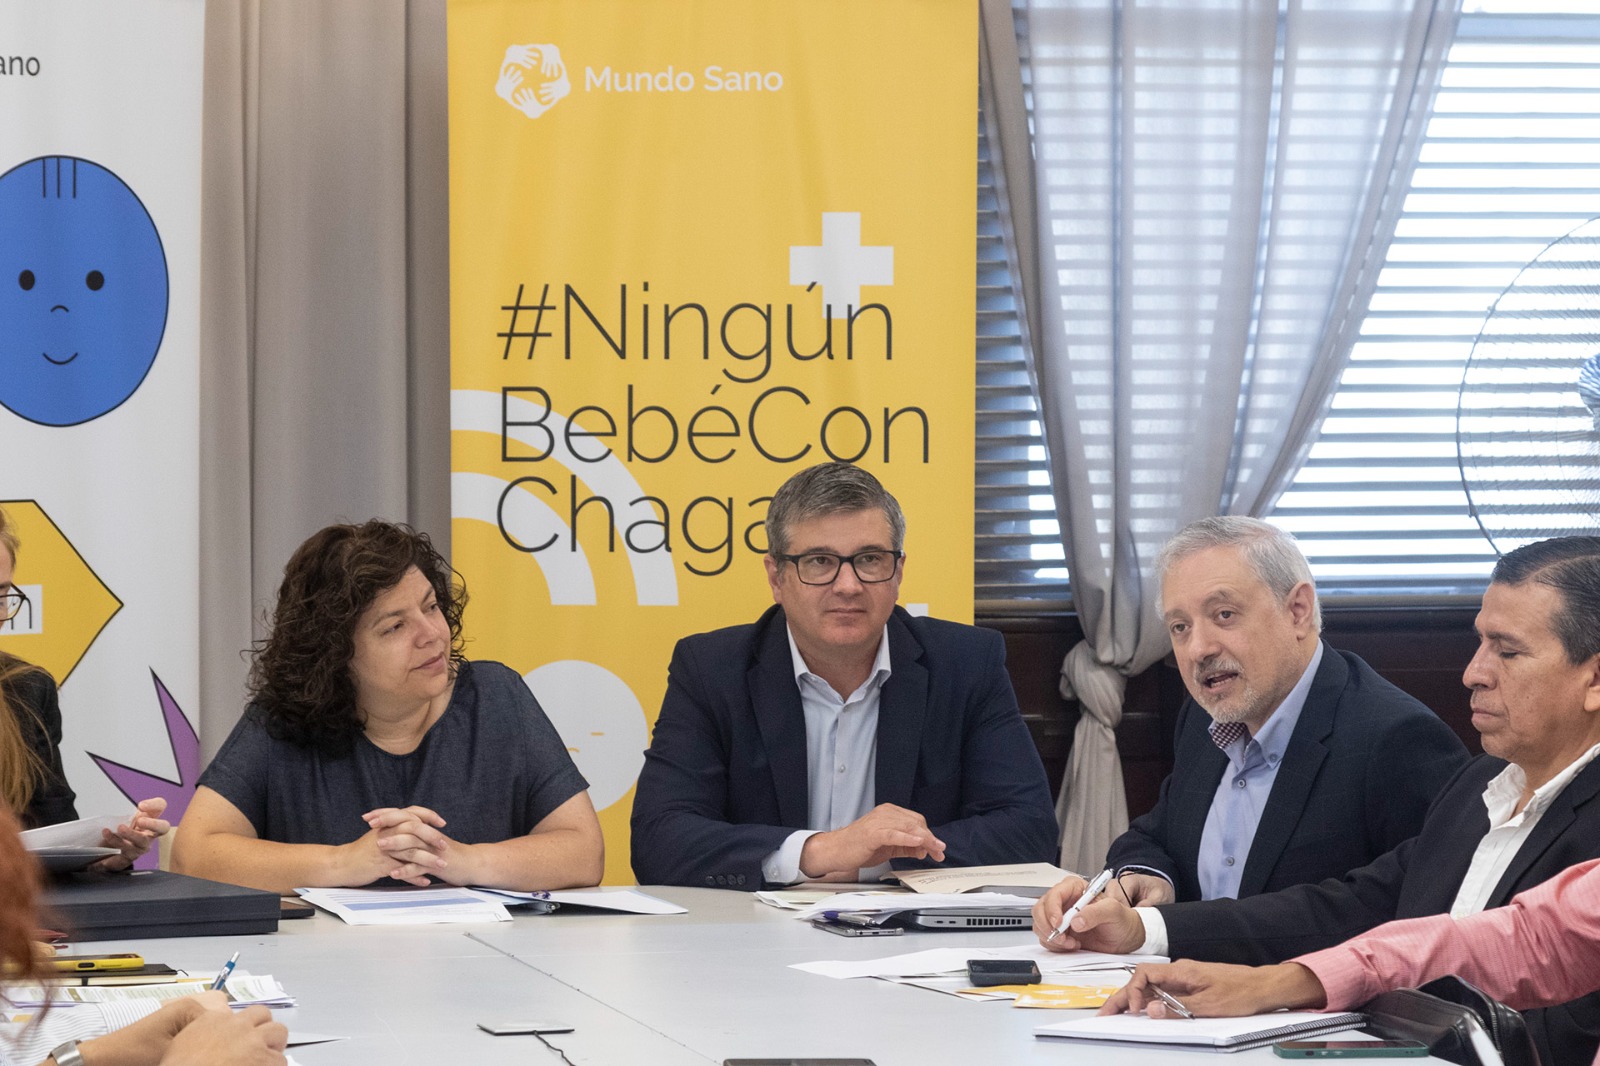 Vizzotti Participated In The Ibero-American Project On Congenital Chagas Disease Within The Framework Of The Ibero-American Intergovernmental Council.